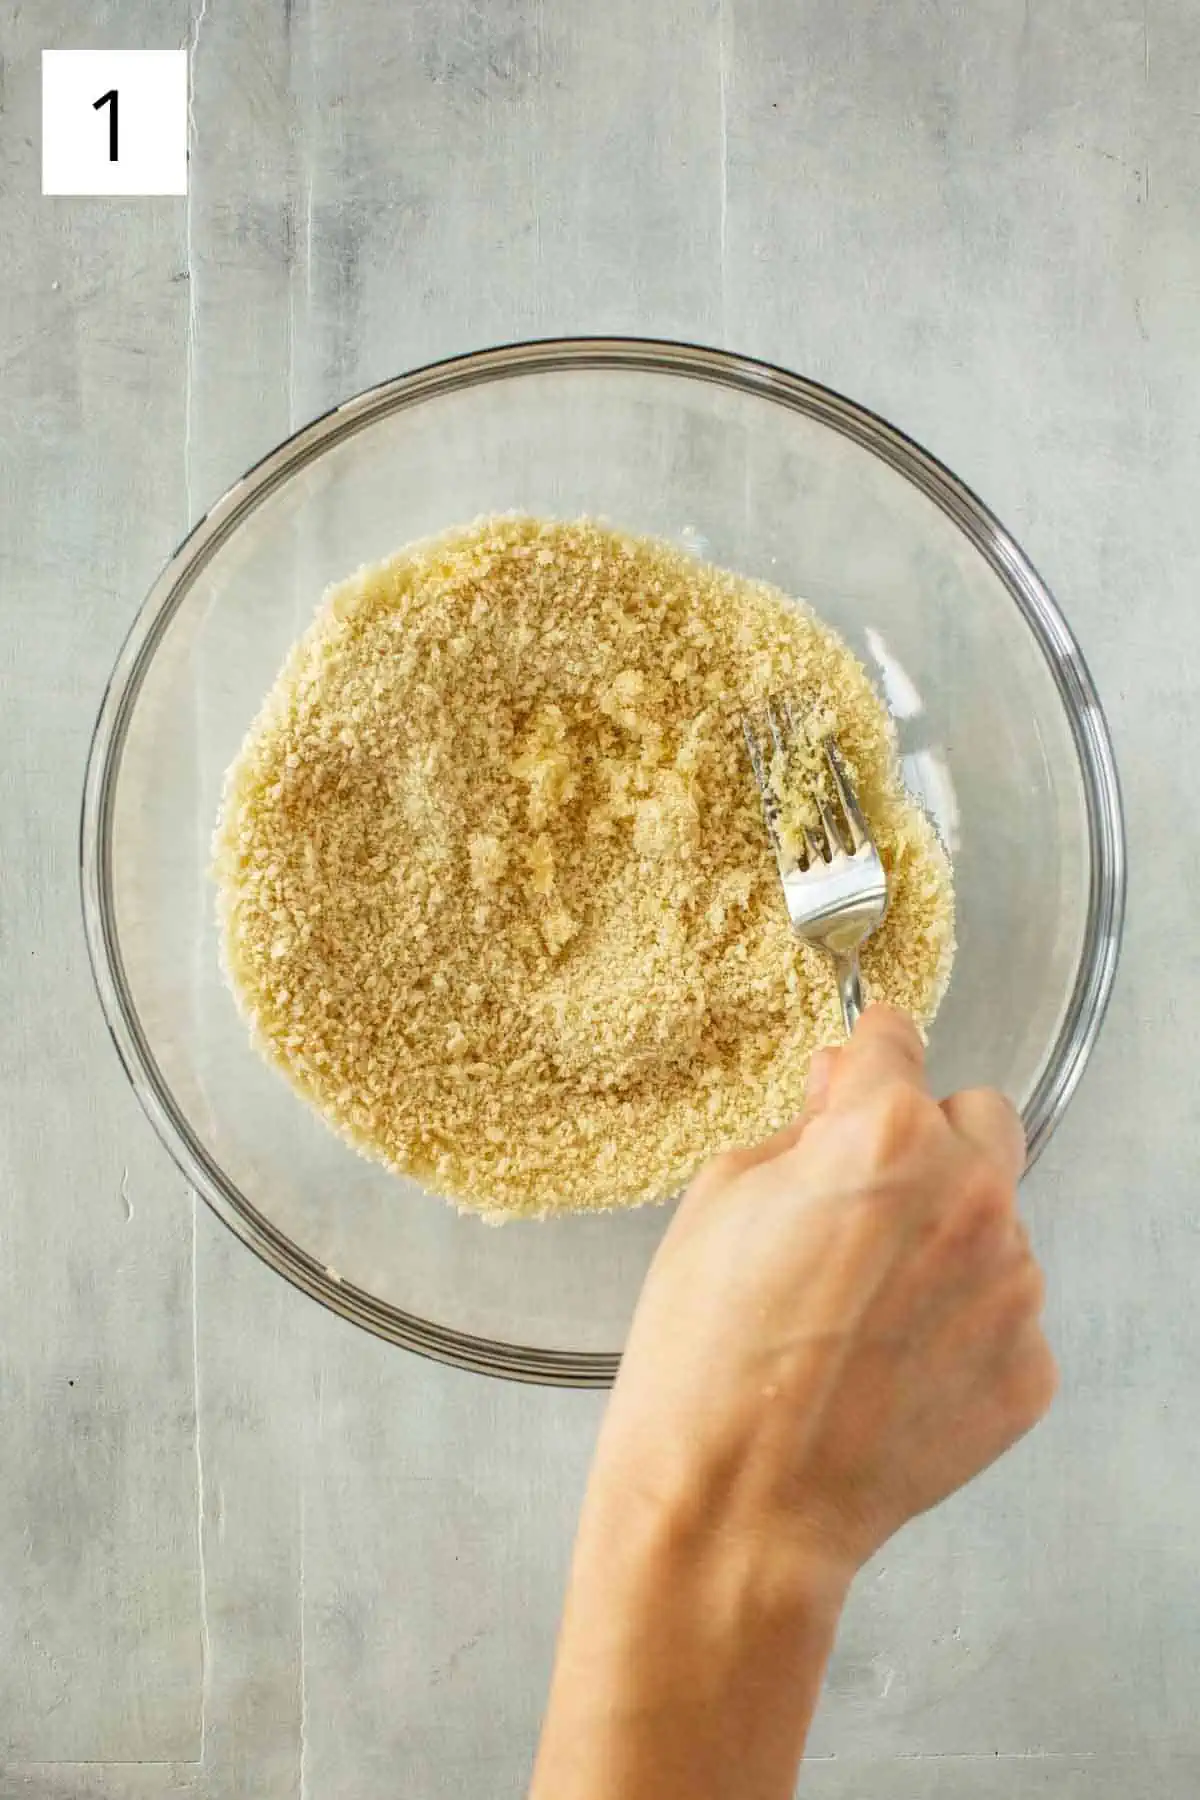 A fork mixing grated garlic into a glass bowl of panko breadcrumbs.